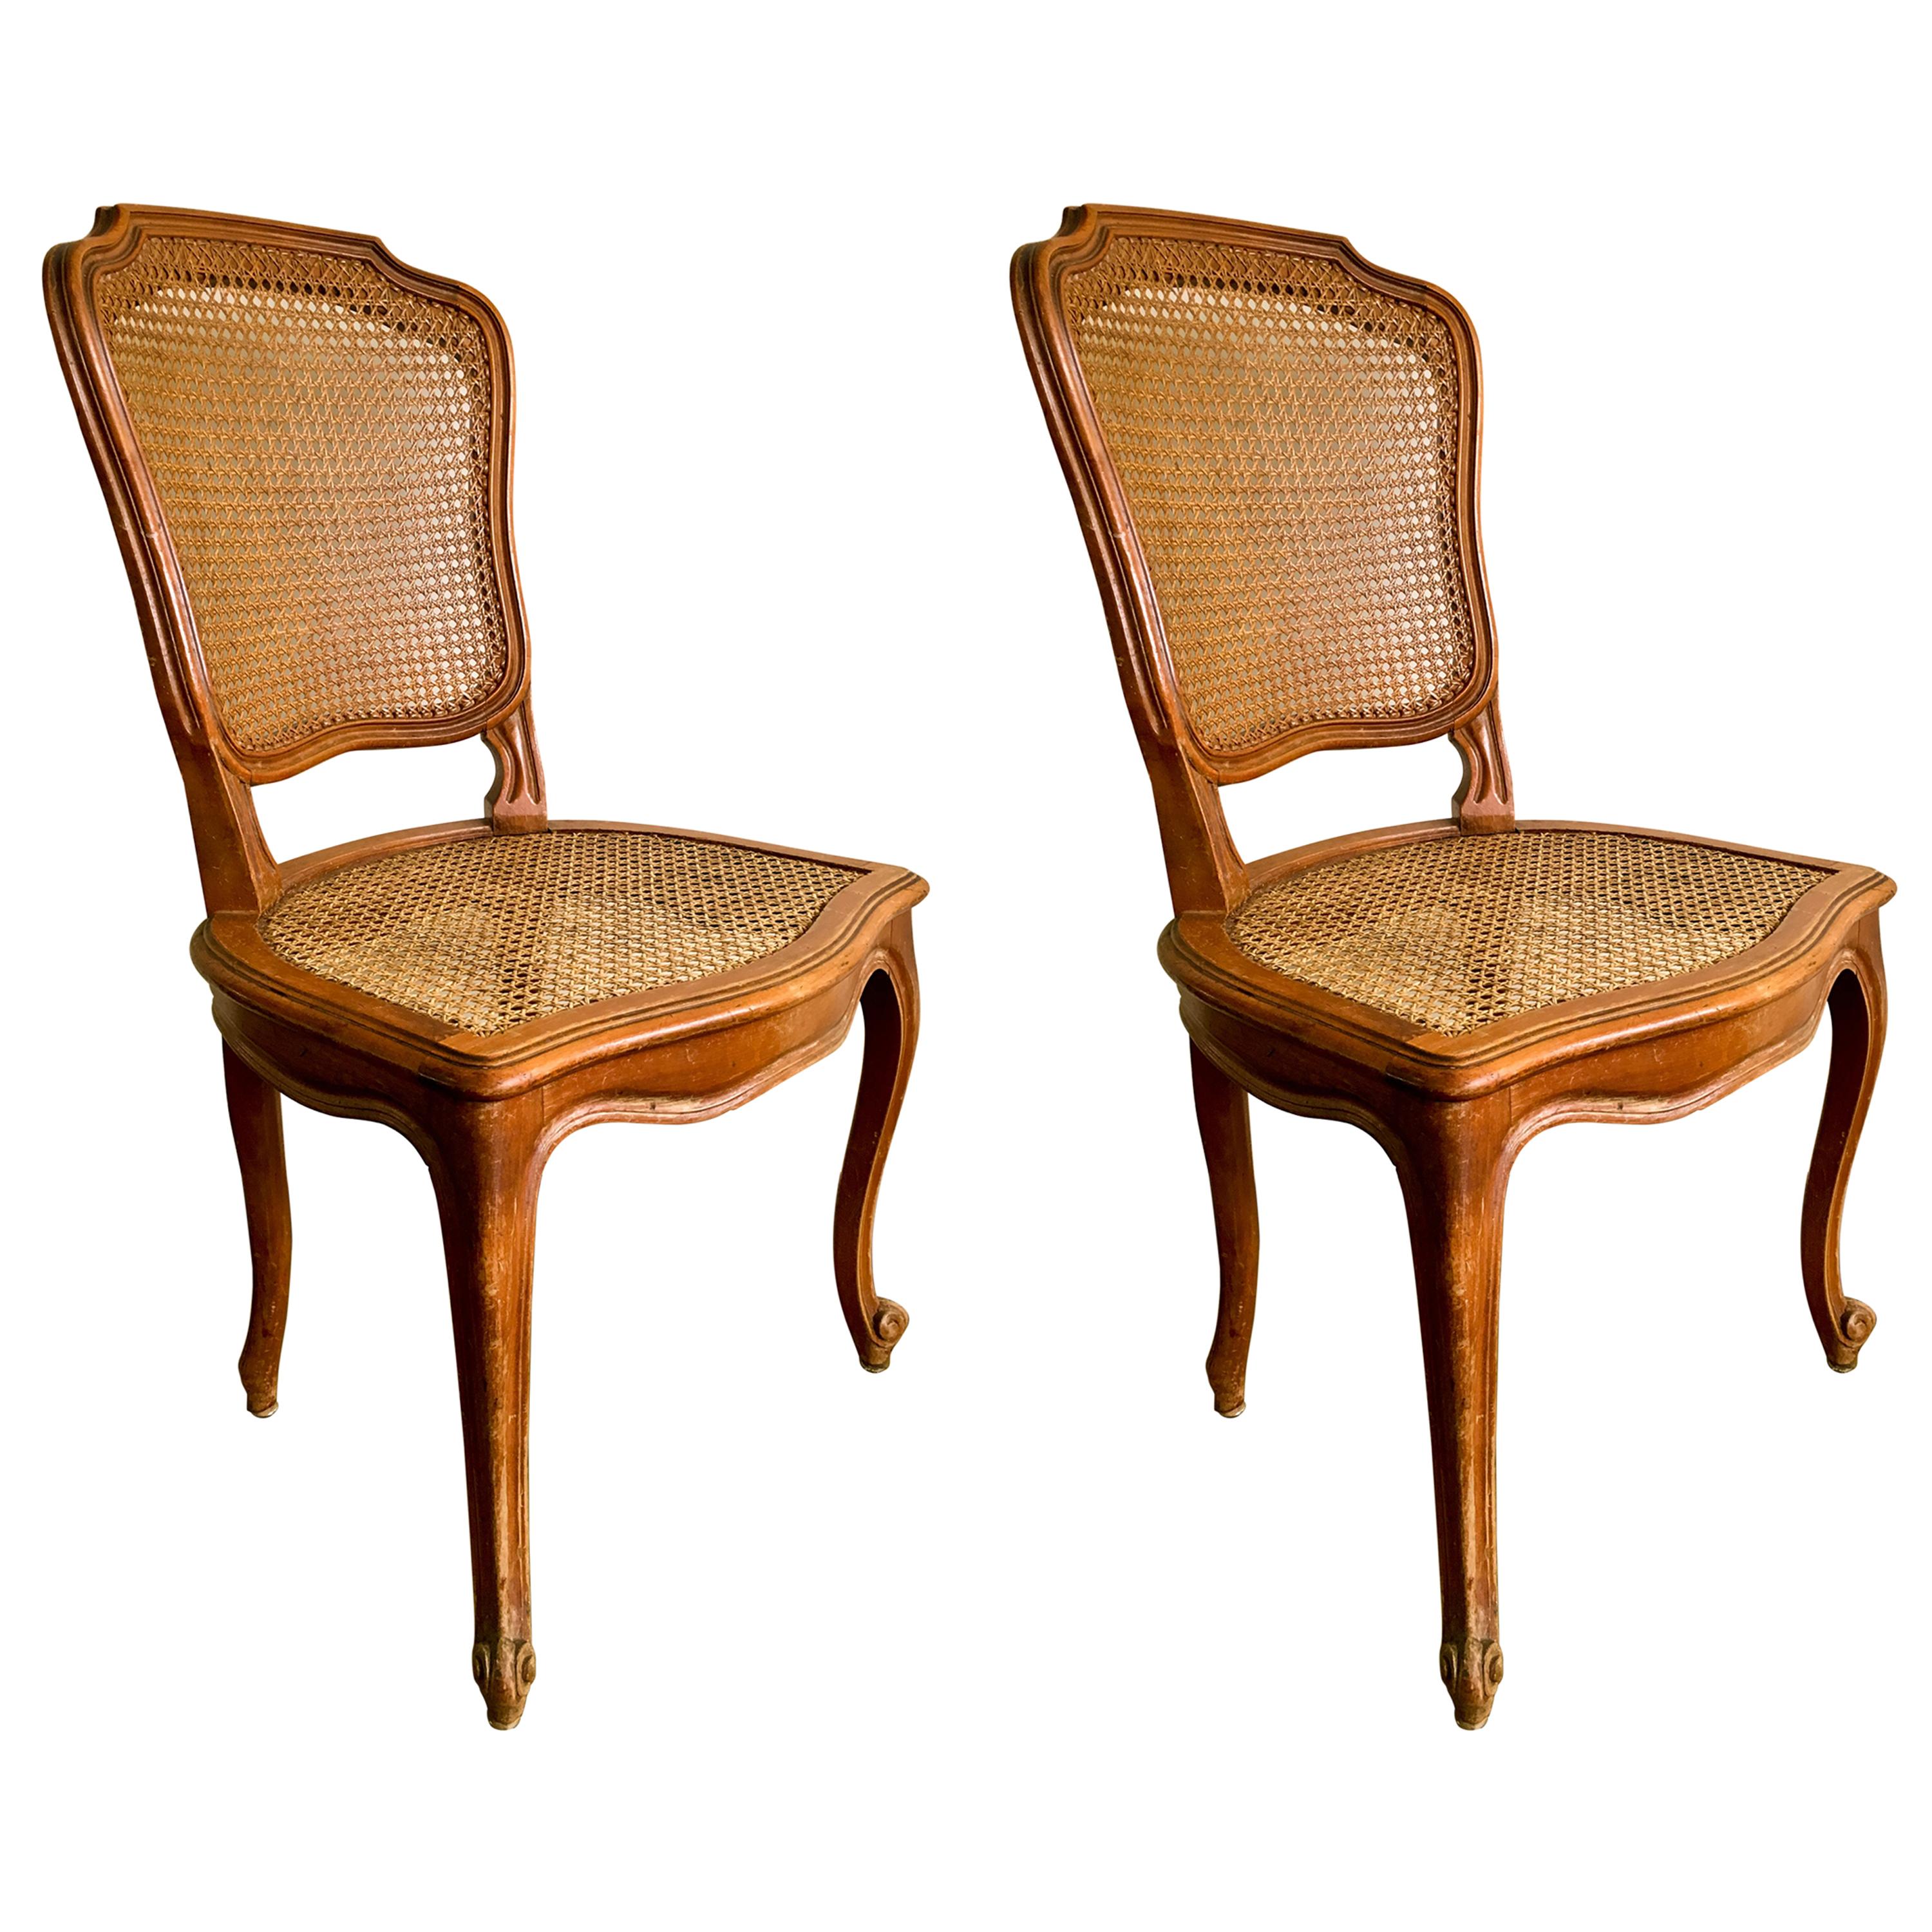 Pair of French Carved Walnut Chairs in Style of Louis XV